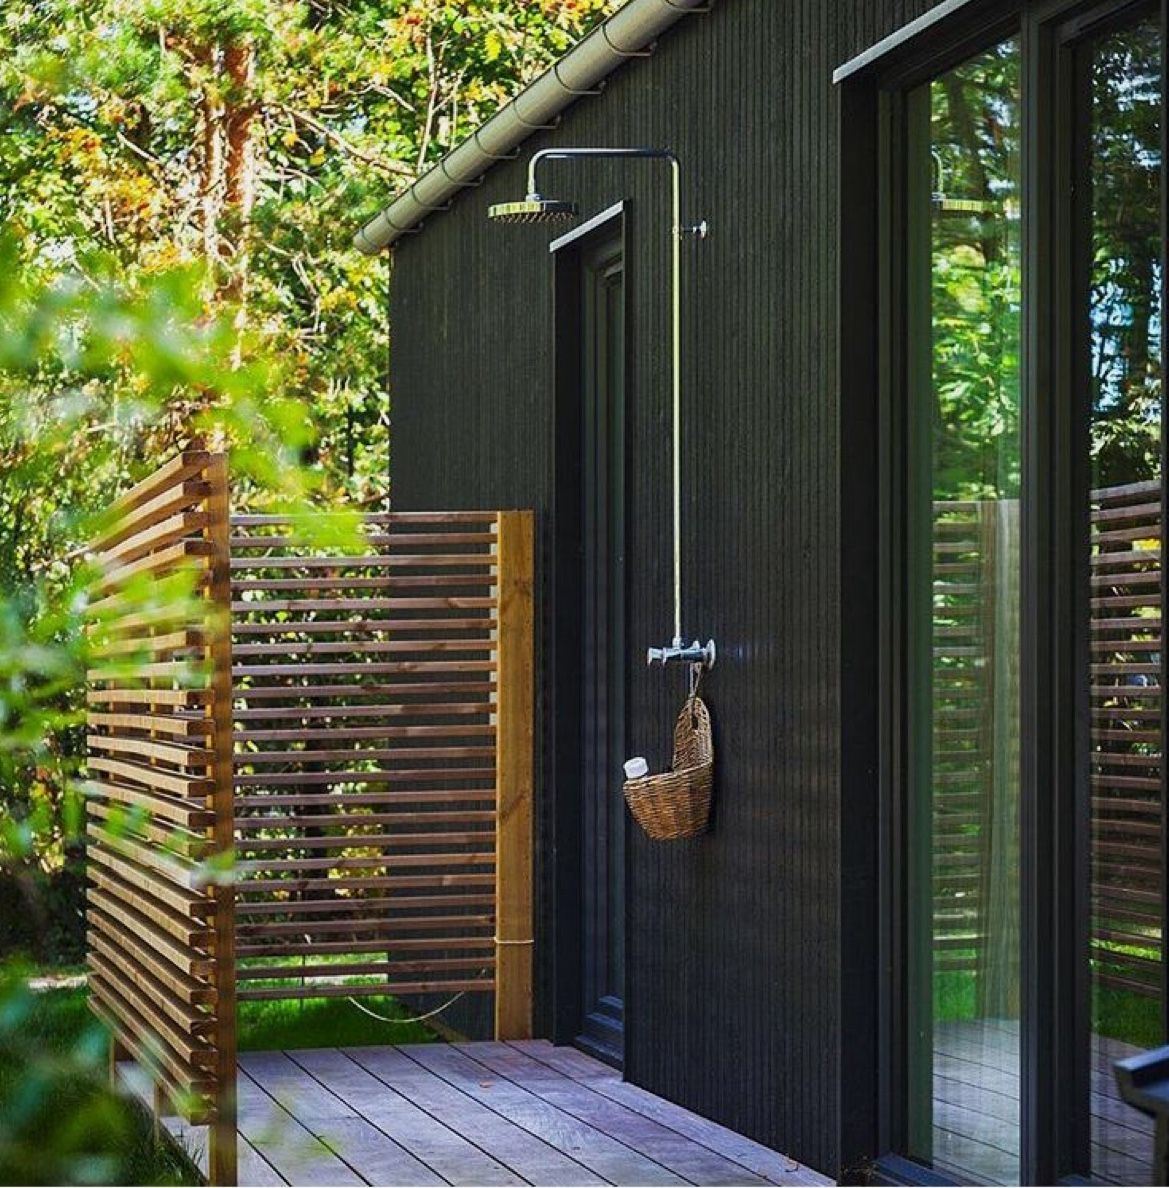 Another simple outdoor shower solution shows that you don't need bells and whistles to make a great space to get clean. #backyard inspiration via www.L-2-Design.com